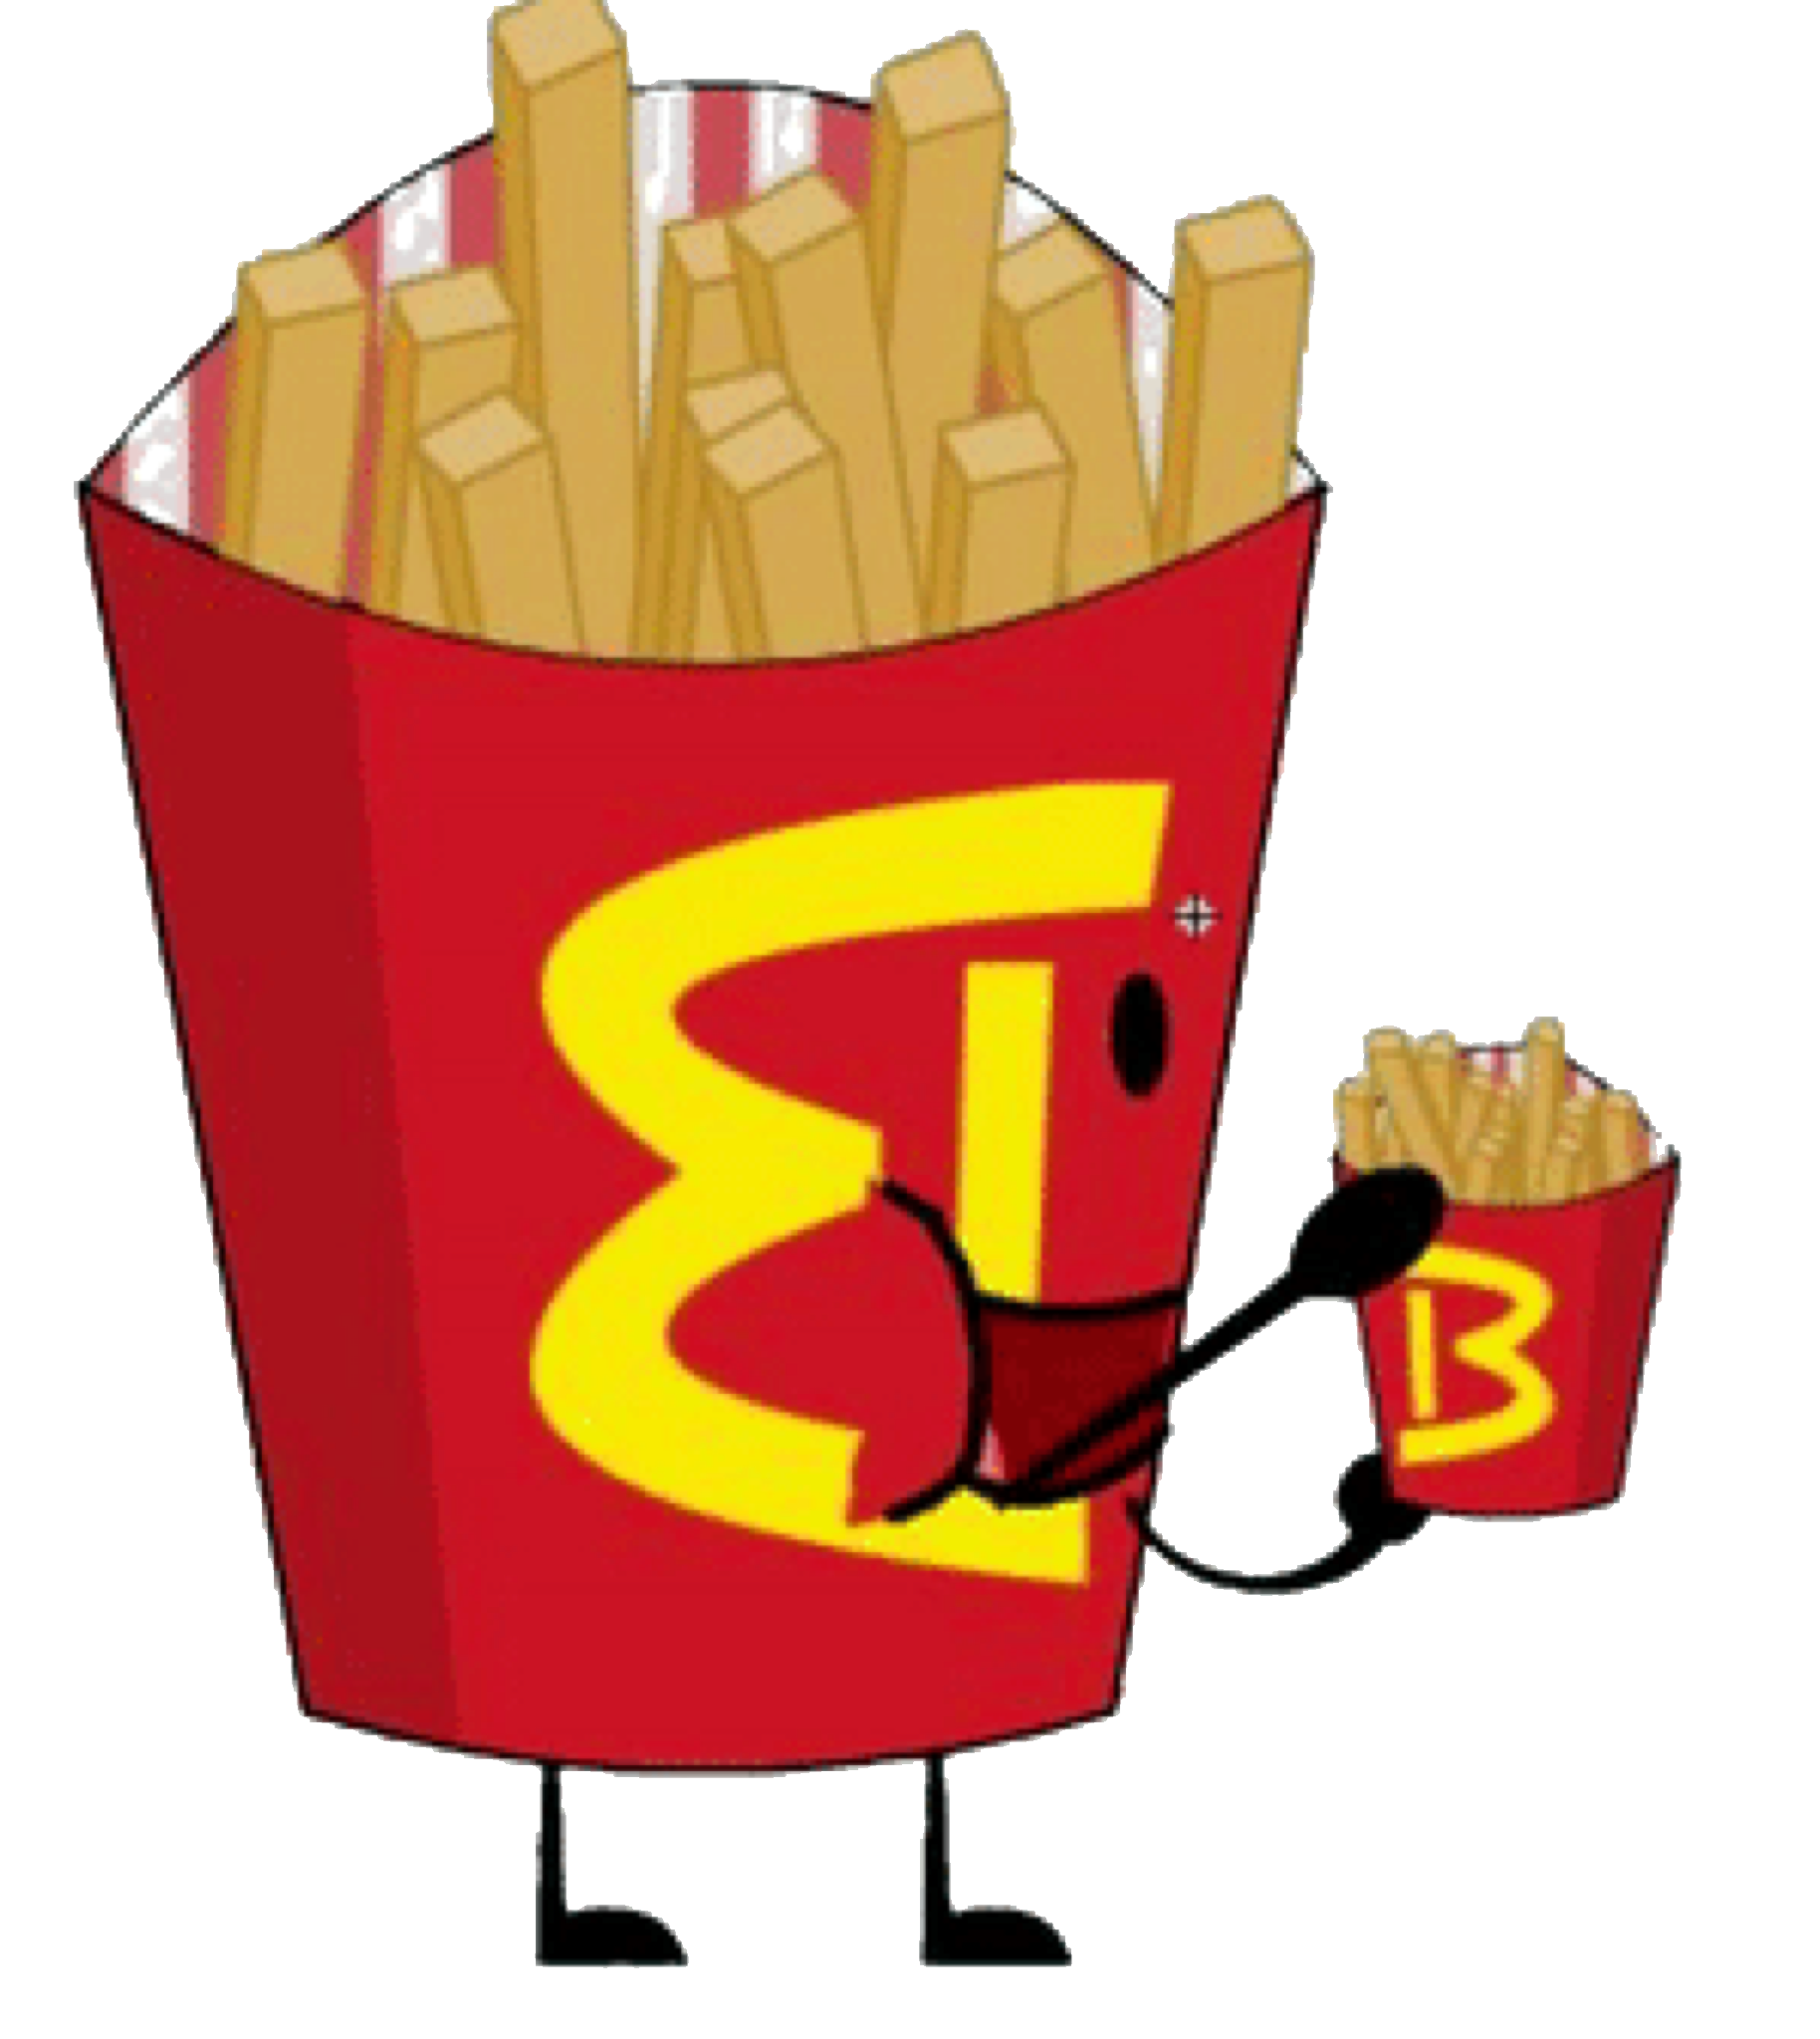 French fries fast food. Mcdonalds clipart resturaunt